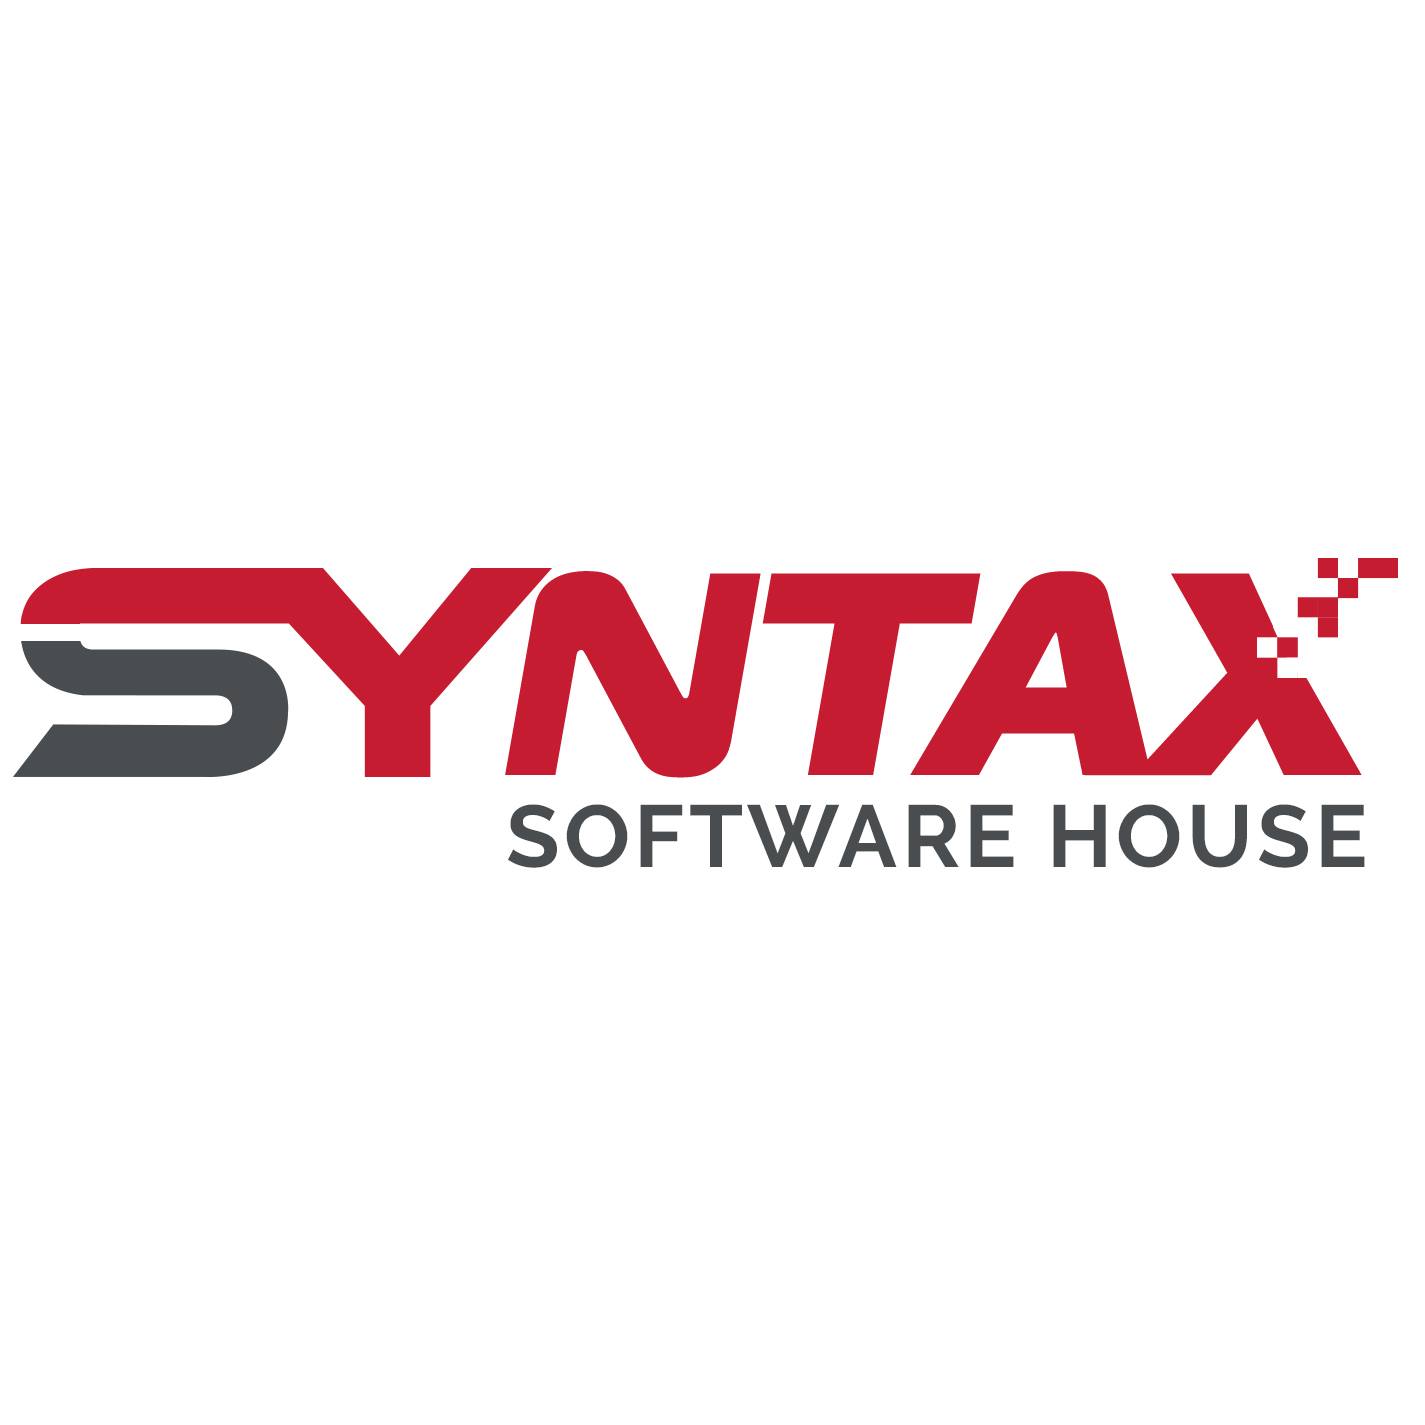 https://www.pakpositions.com/company/syntax-software-house-1682661482